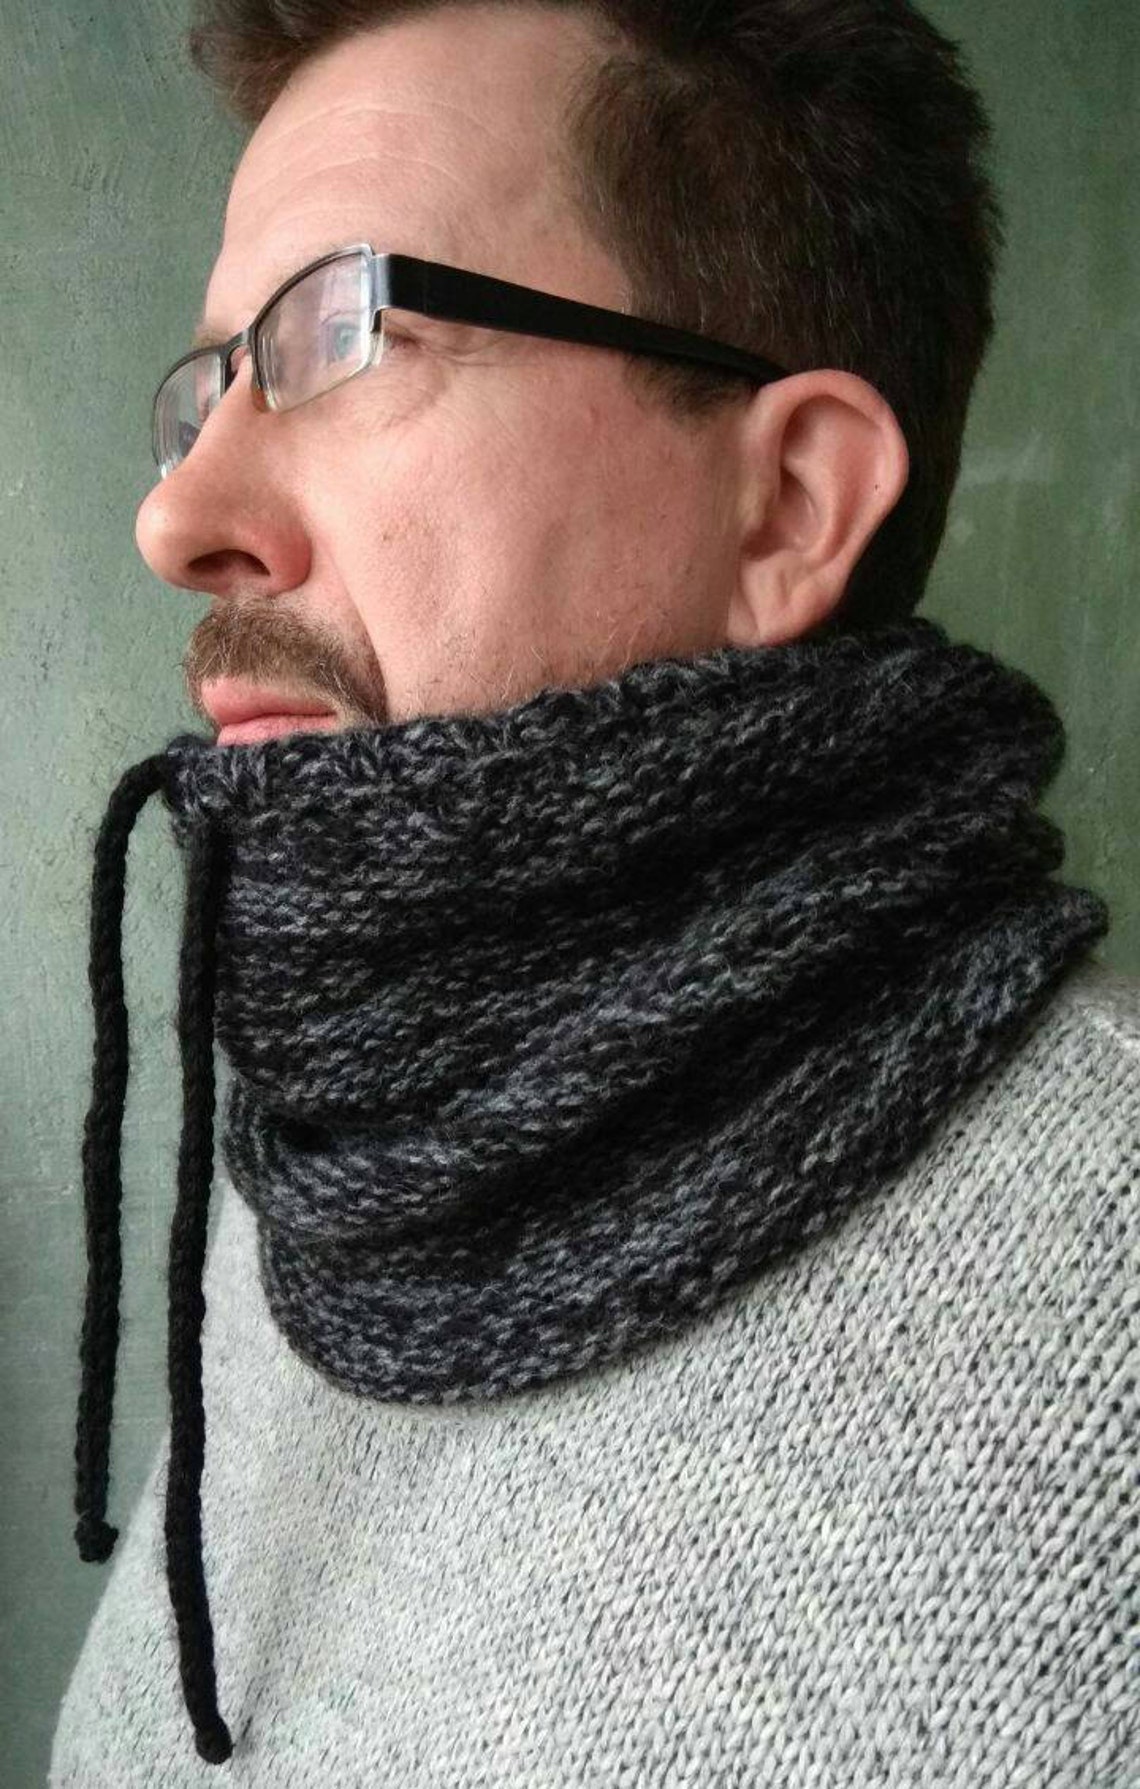 Chunky Men's Snood Scarf Black Cowl Neck Wool Hooded | Etsy